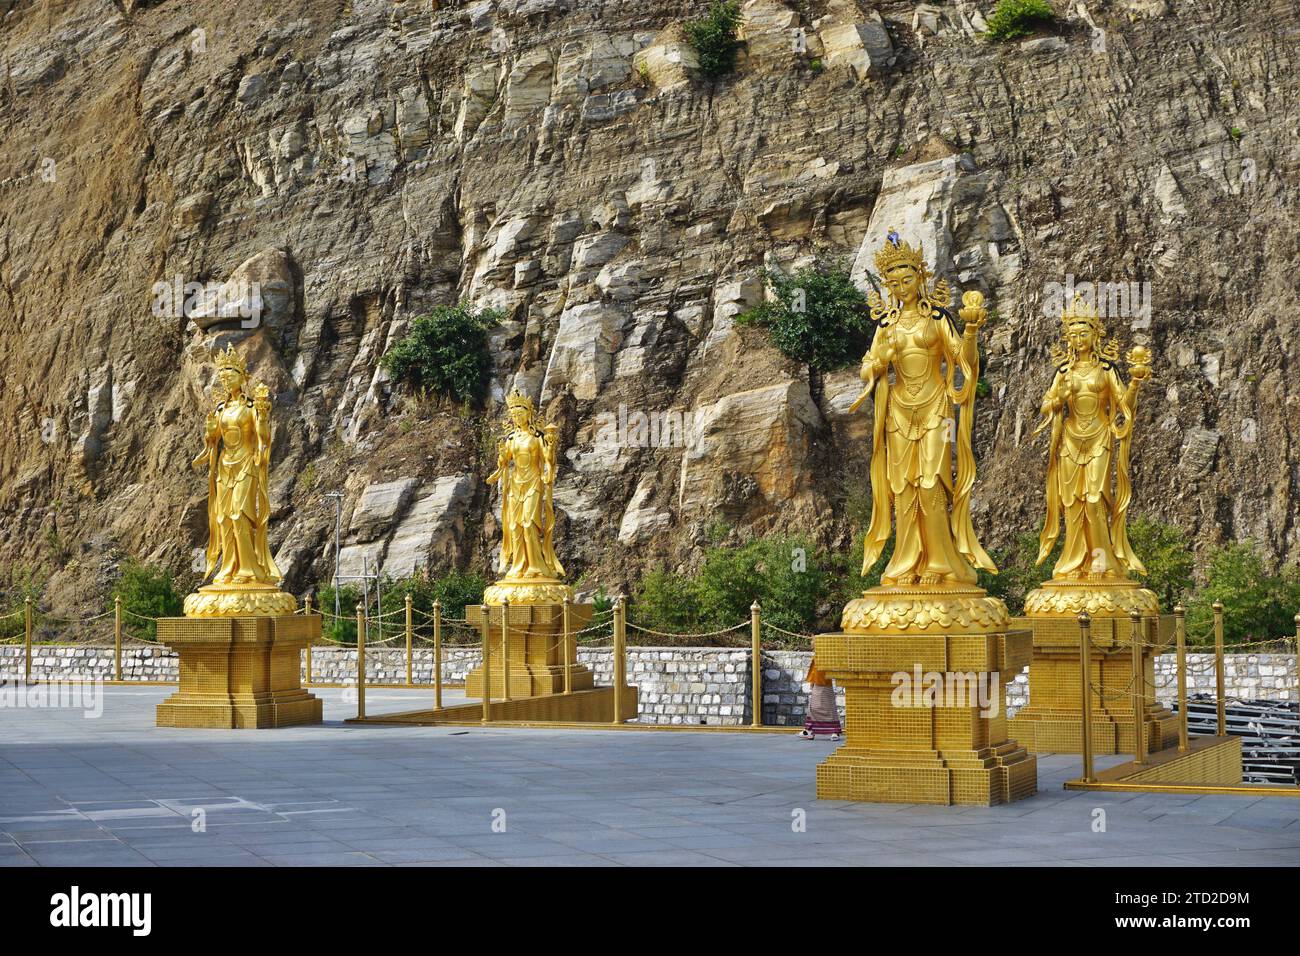 Golden goddess statues contrast with rough rock face behind at the Buddha Dordenma monument in the Kuensel Phodrang nature park near Thimphu, Bhutan. Stock Photo